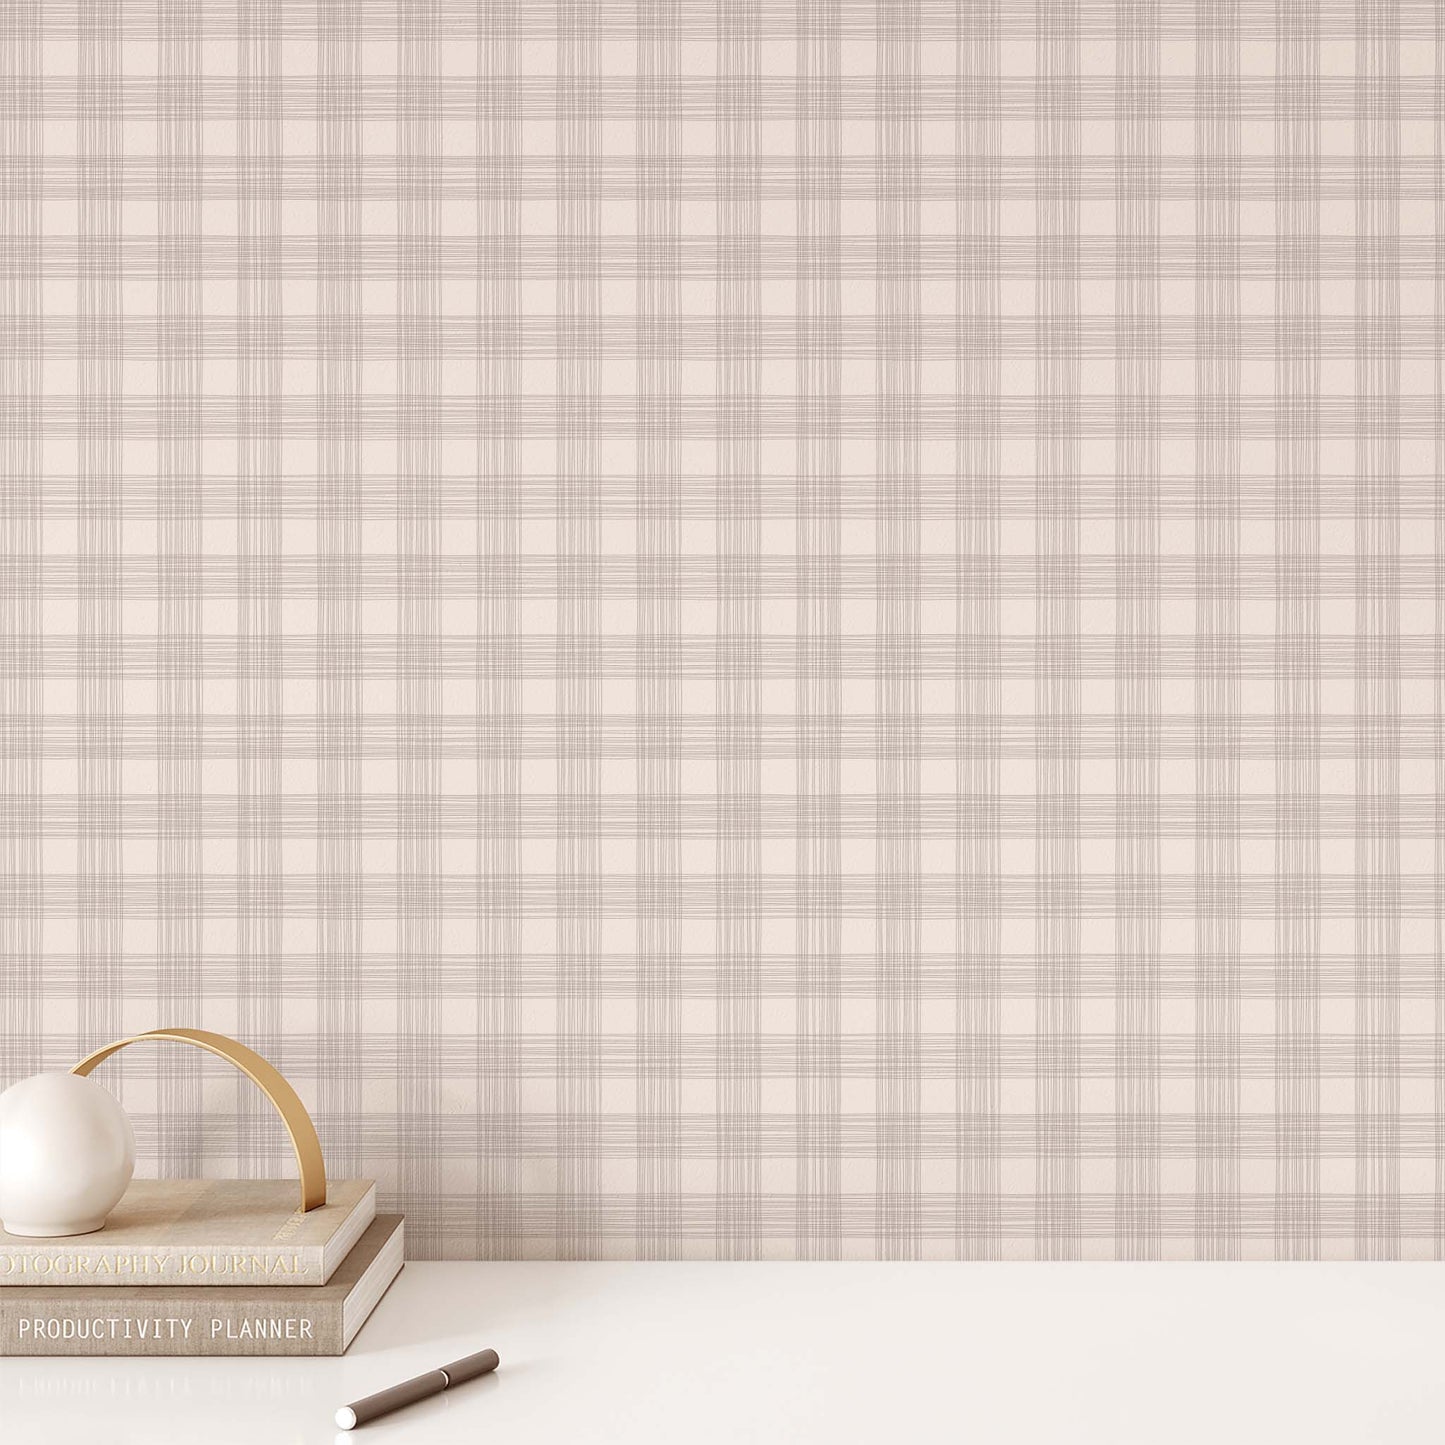 Office Wall featuring Ayara's Checked Marks Peel and Stick, Removable Wallpaper in Taupe